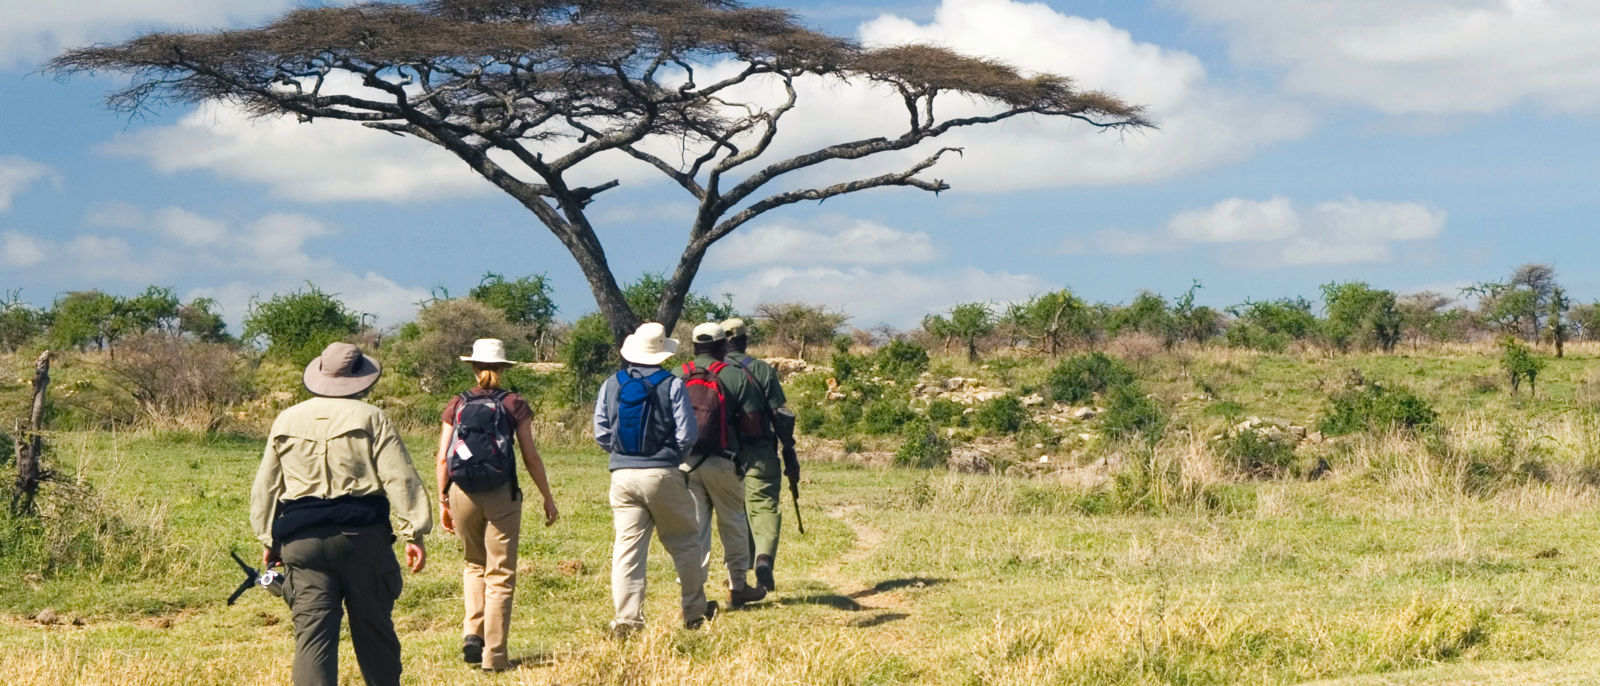 Group of travelers on a walking safari in Tanzania, approaching a flat-top acacia tree, with armed guide in the lead.